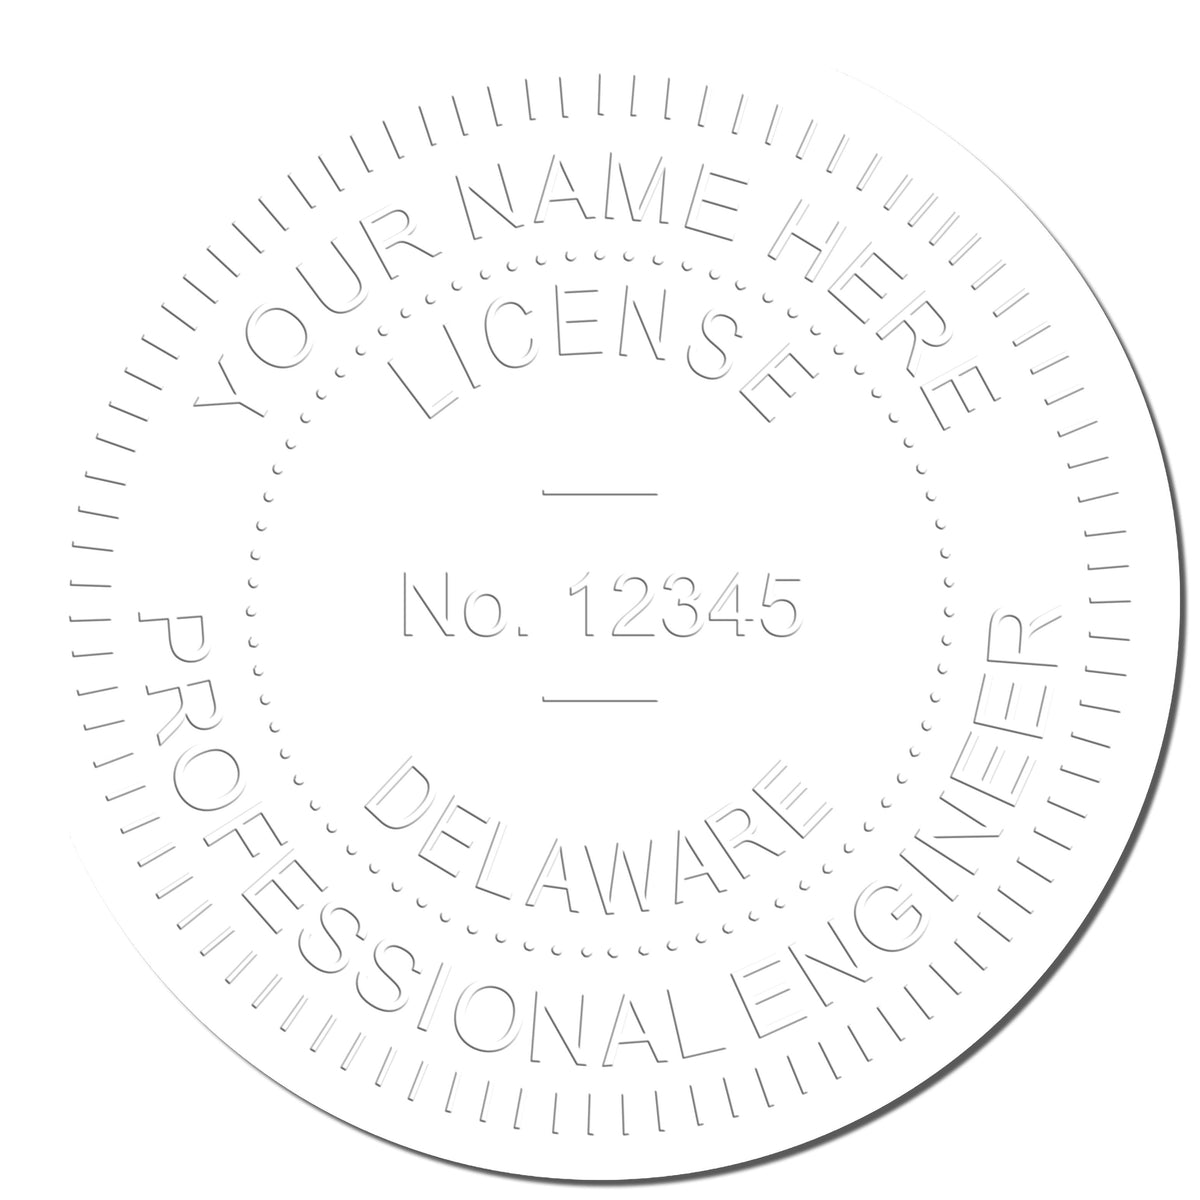 A photograph of the Handheld Delaware Professional Engineer Embosser stamp impression reveals a vivid, professional image of the on paper.